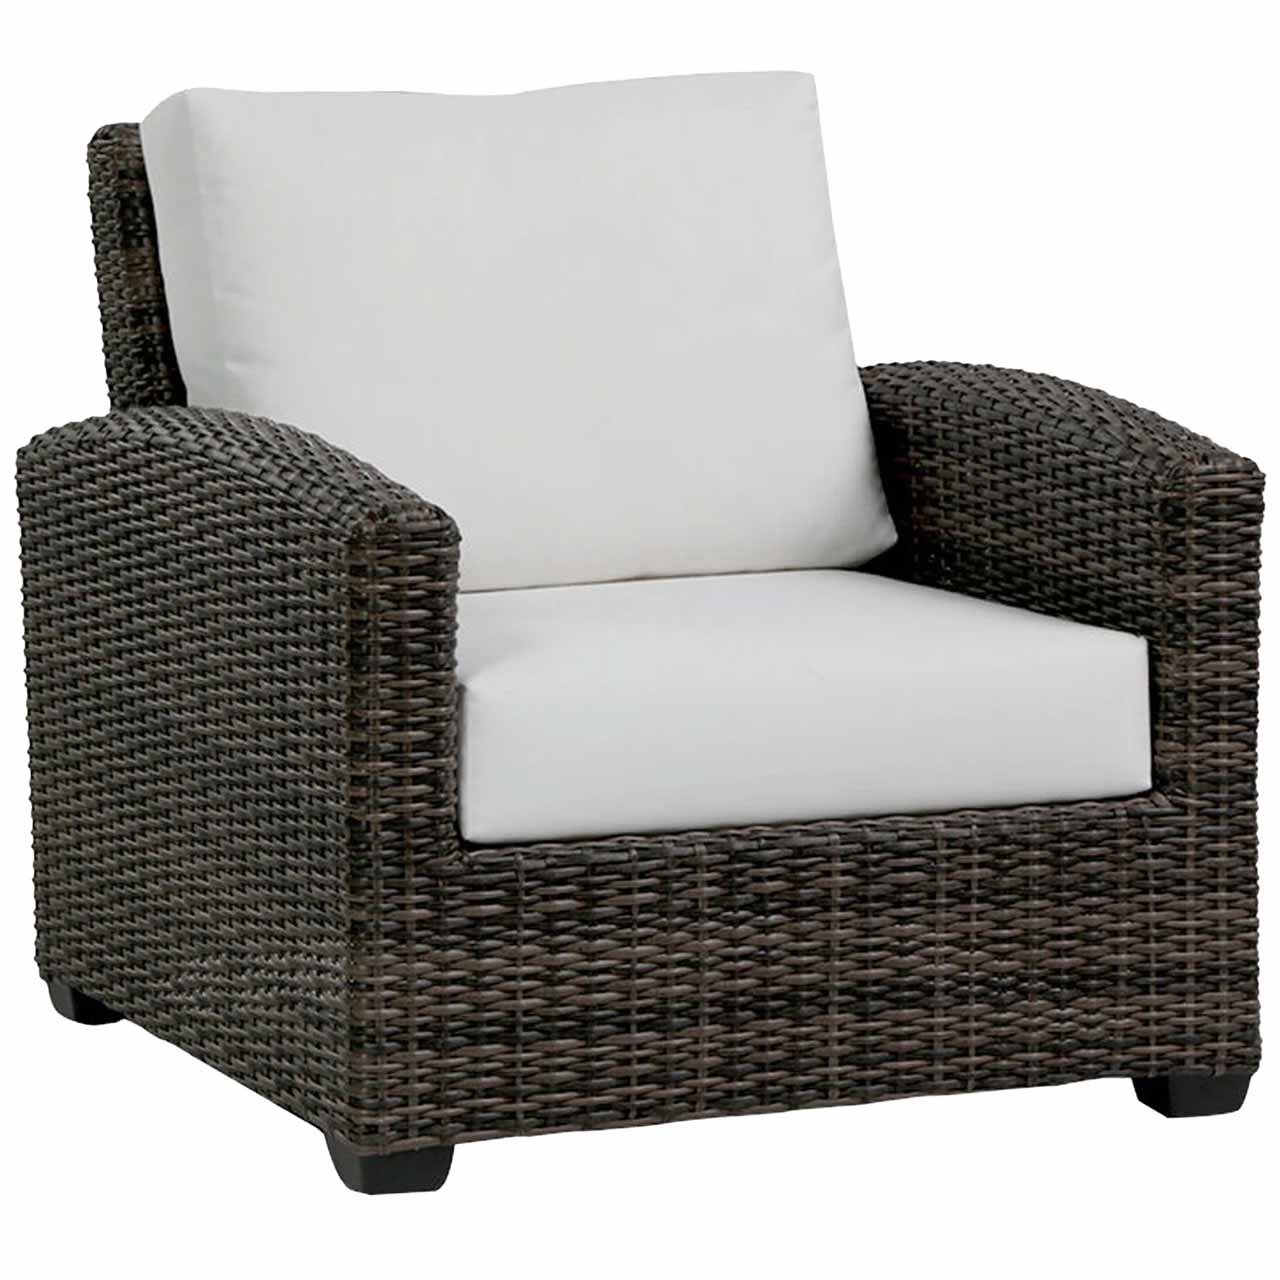 Ratana Coral Gables Club Chair with Switch Flax Cushions 12038938